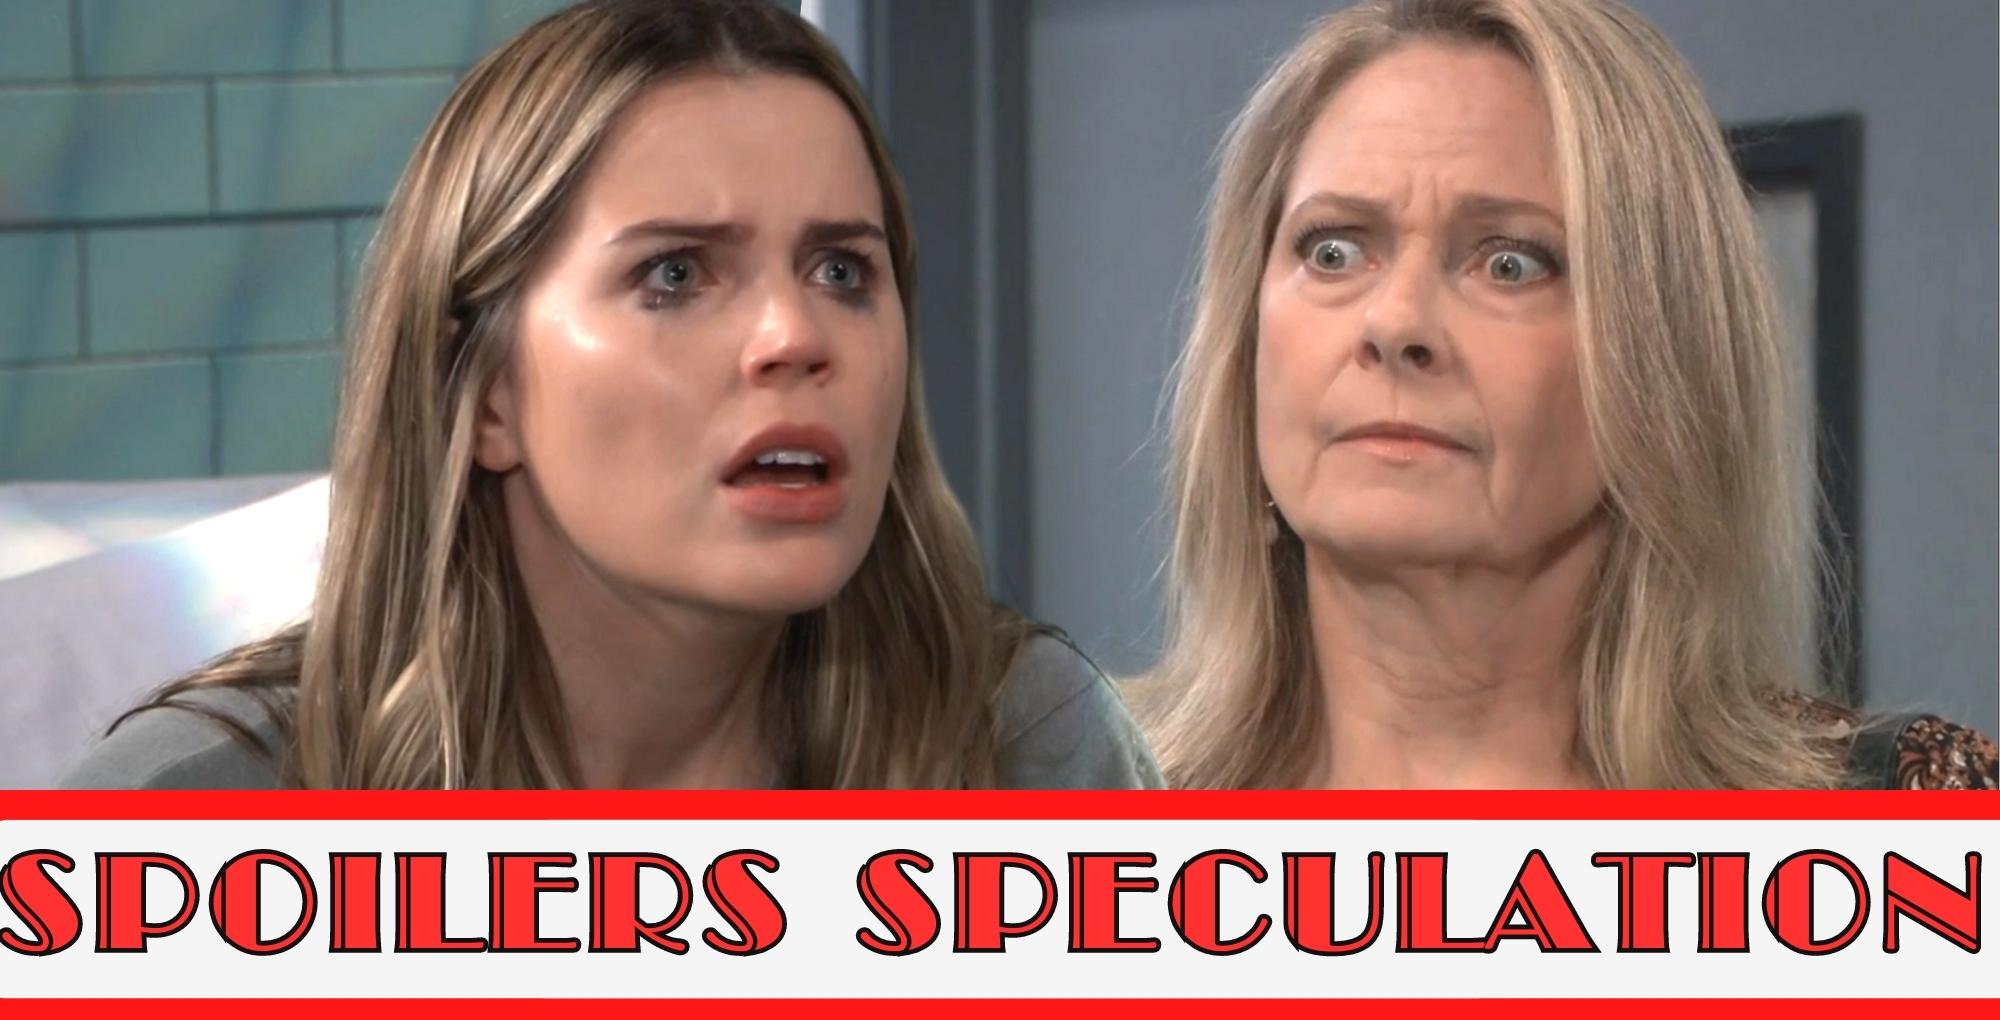 gh spoilers speculation that sasha discovers what gladys did.